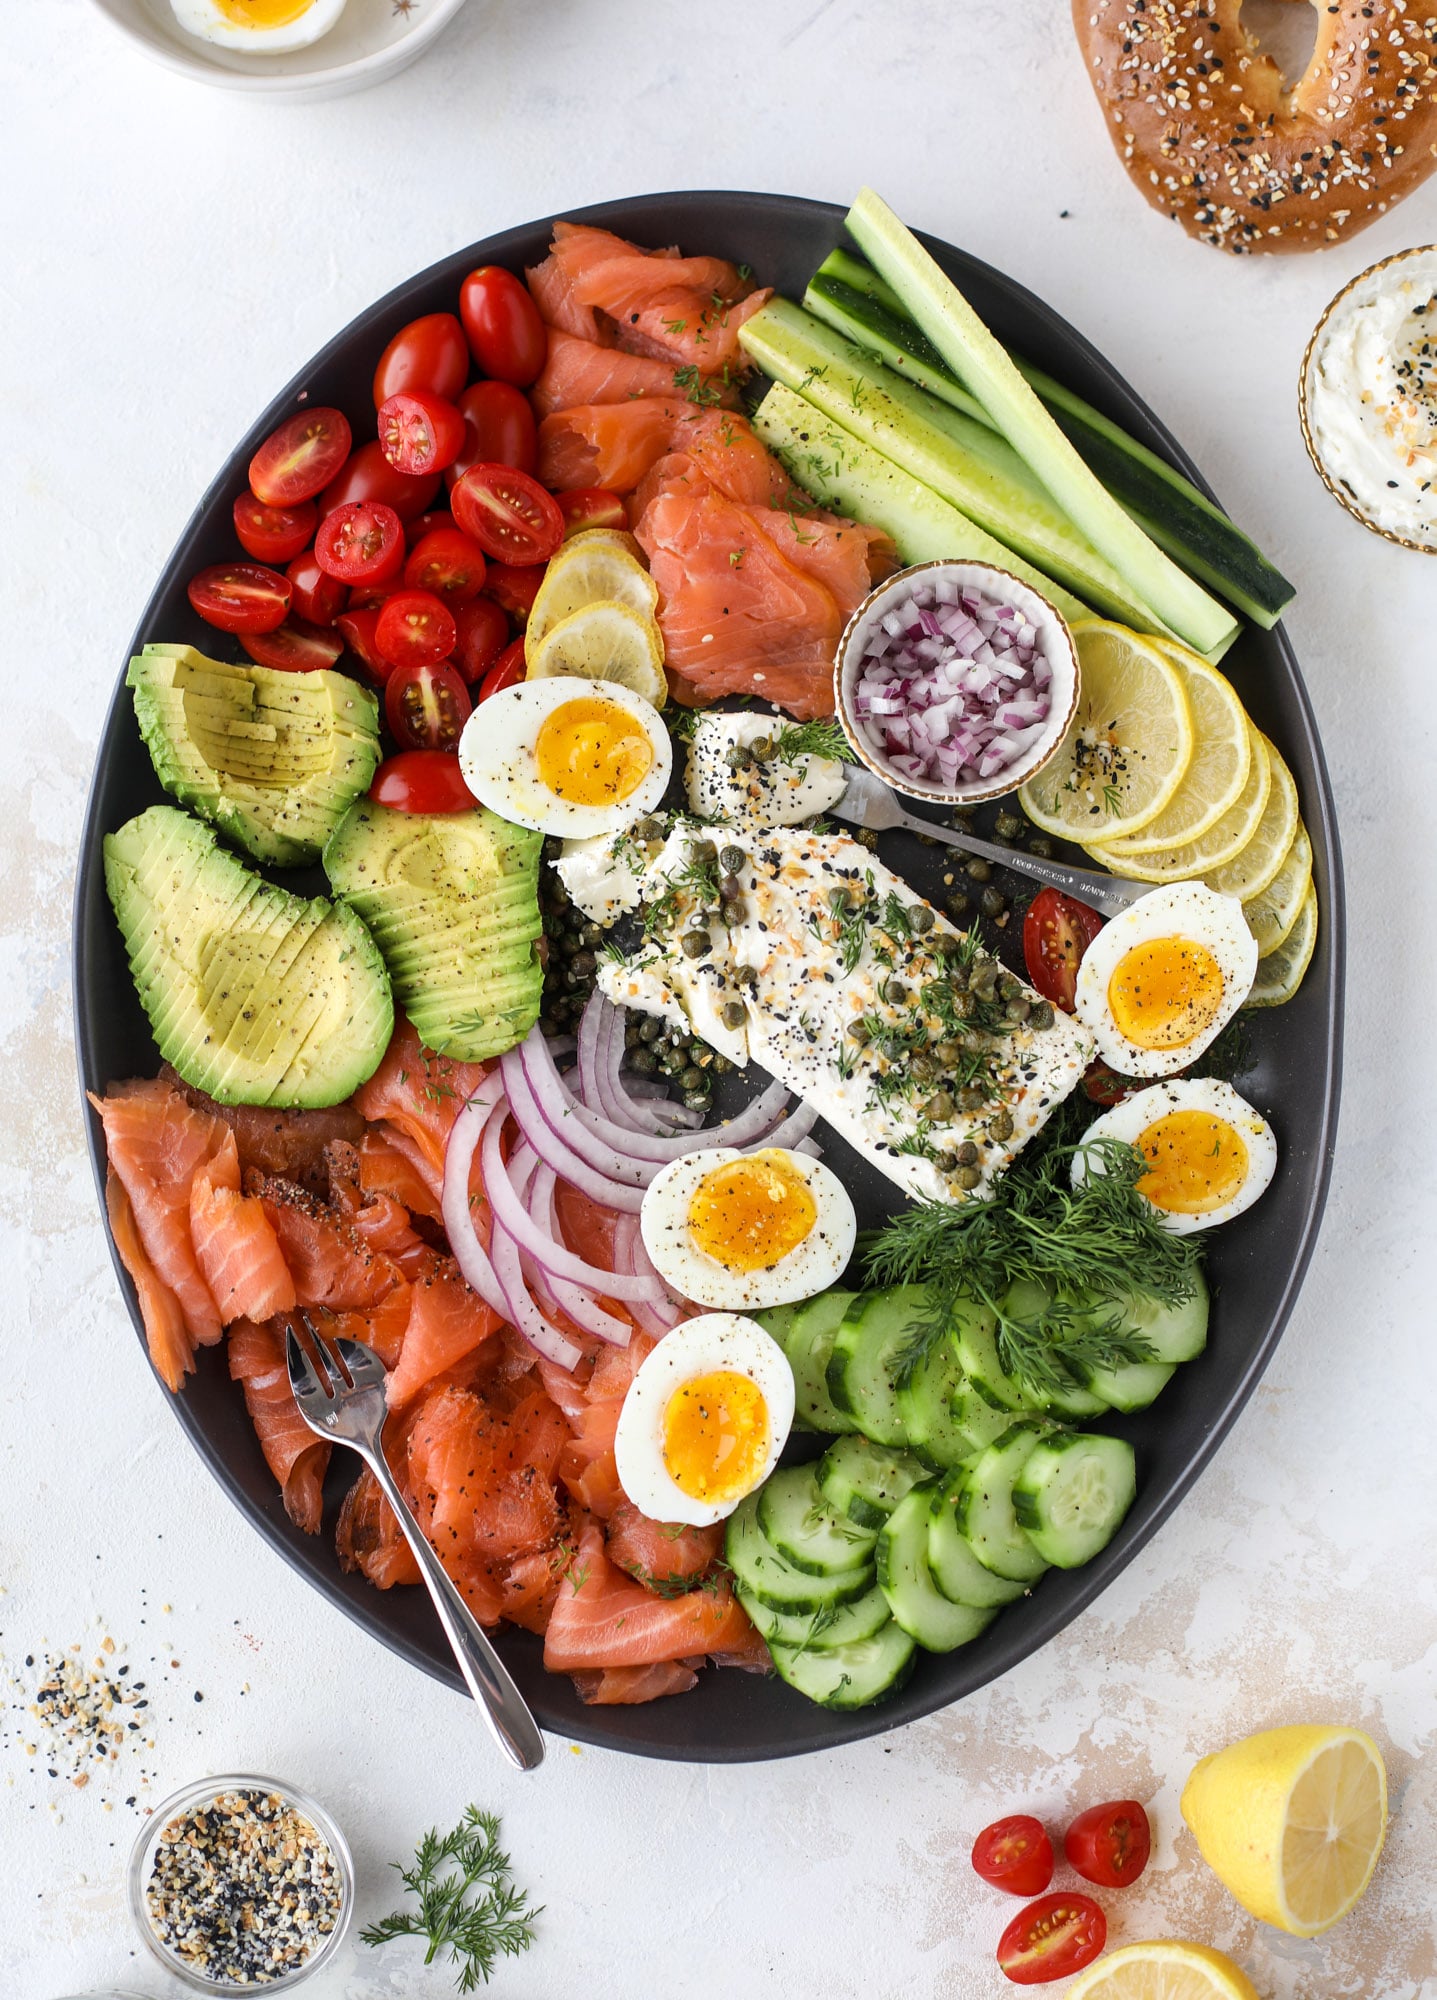 This is my favorite way to make an incredible smoked salmon platter! Fresh smoked salmon with bagels, soft boiled eggs, cream cheese and capers, everything seasoning and so much more. Perfect for holiday breakfasts and brunches! I howsweeteats.com #smokedsalmon #platter